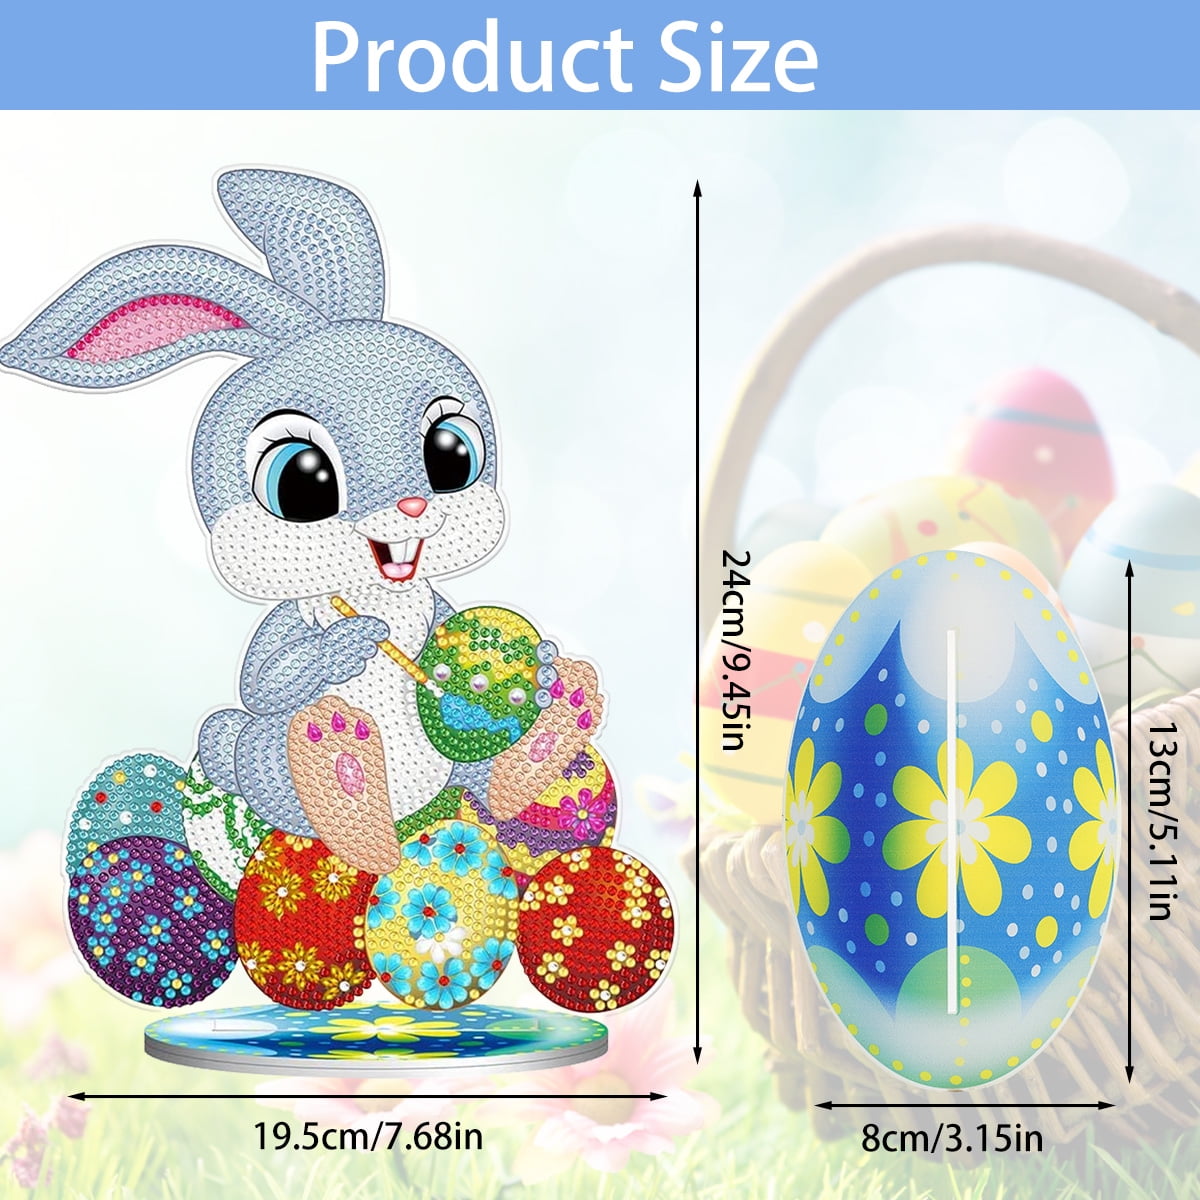 5D Diamond Painting Kits Cute Bunny Resin Diamond Paint Ornament DIY Diamond Art Painting Kits for Adults Easter Art Crafts Desk Decoration for